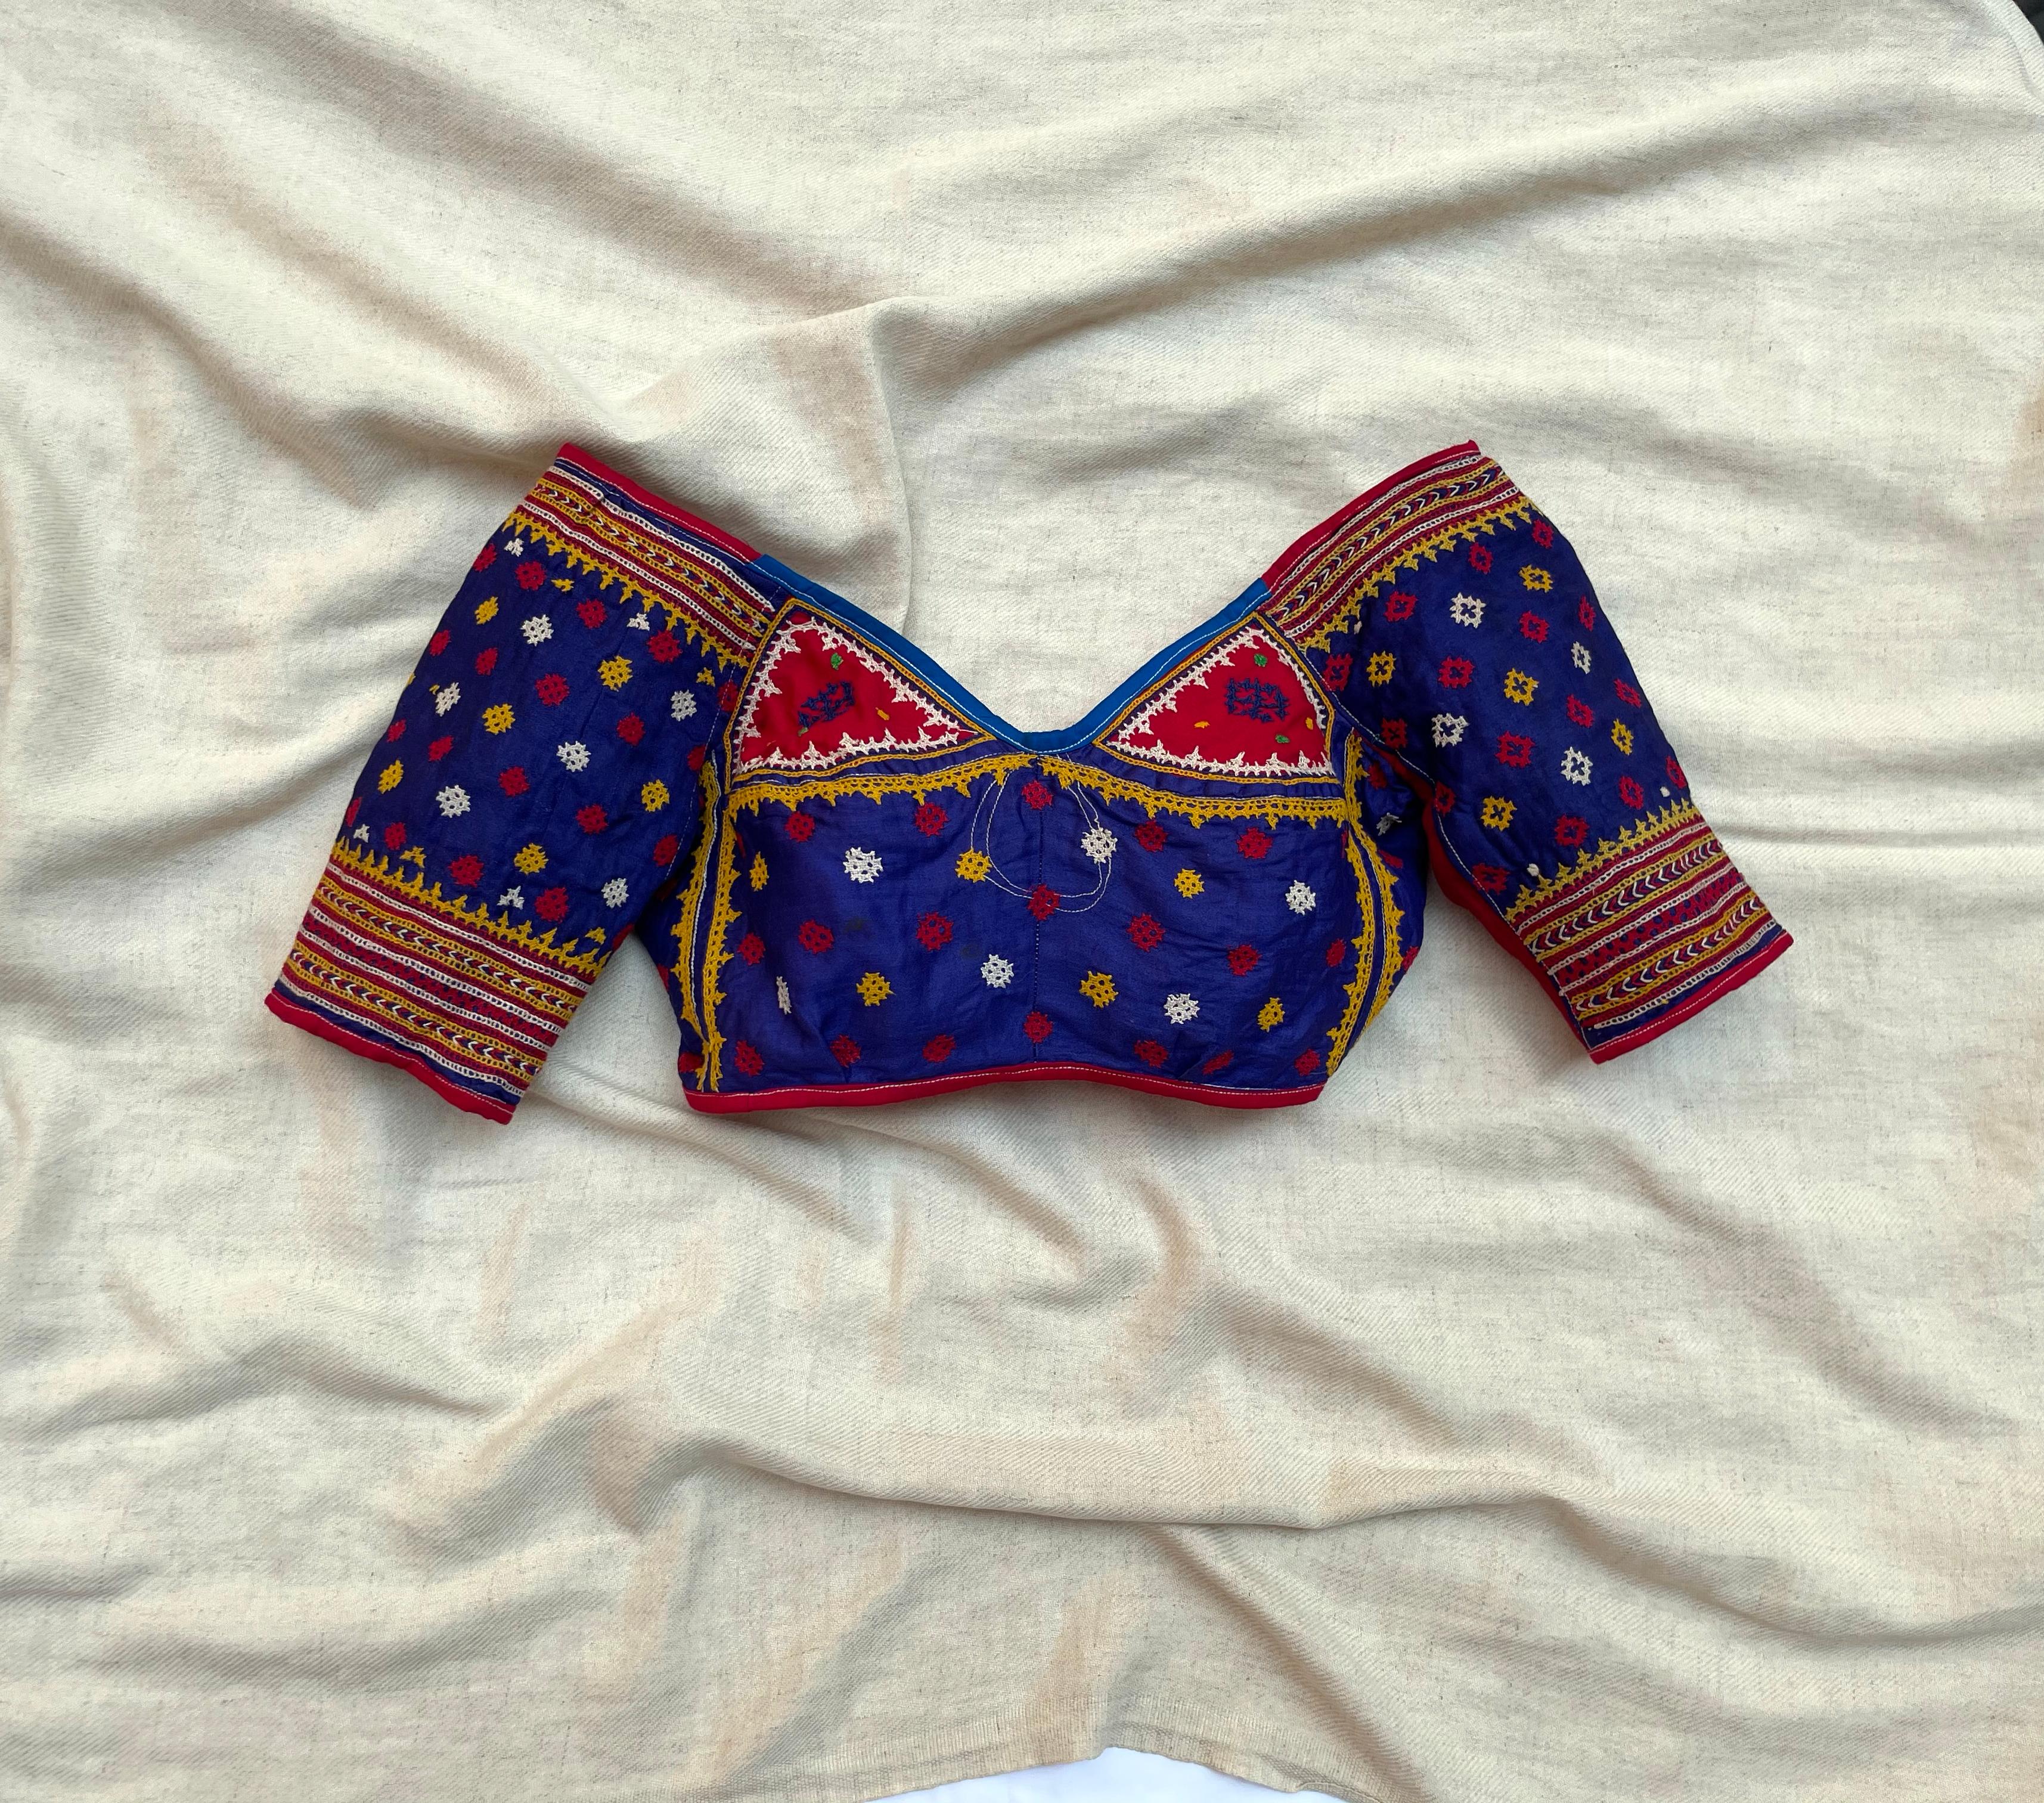 Vintage Rabari Embroidered Choli Tops In Excellent Condition For Sale In New York, NY